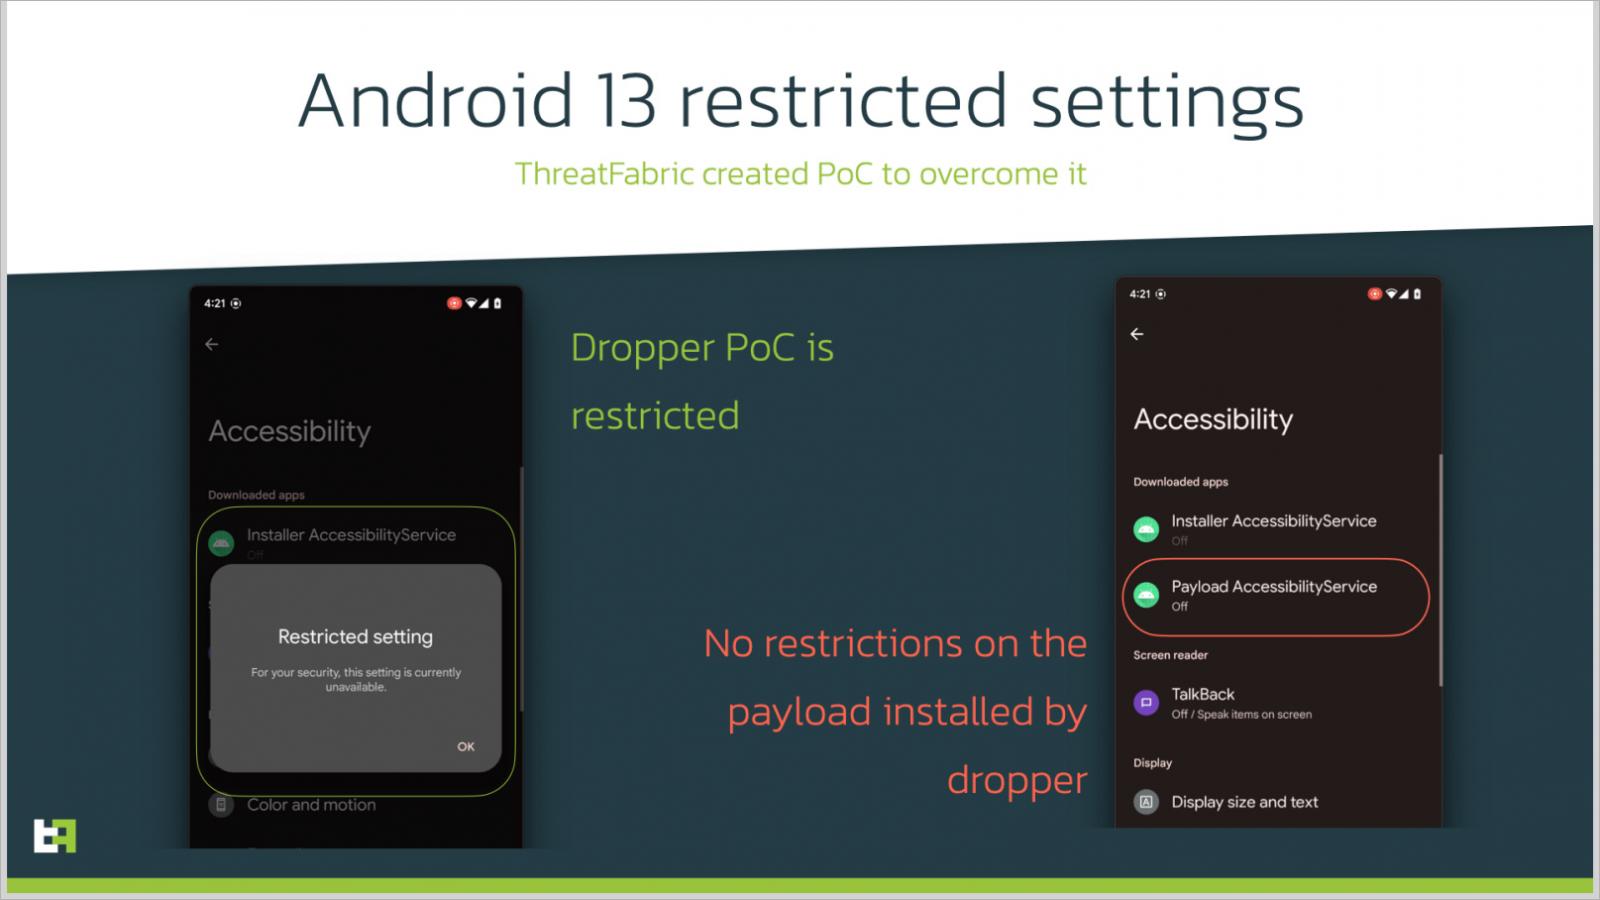 Bypassing Android 13's restricted setting feature